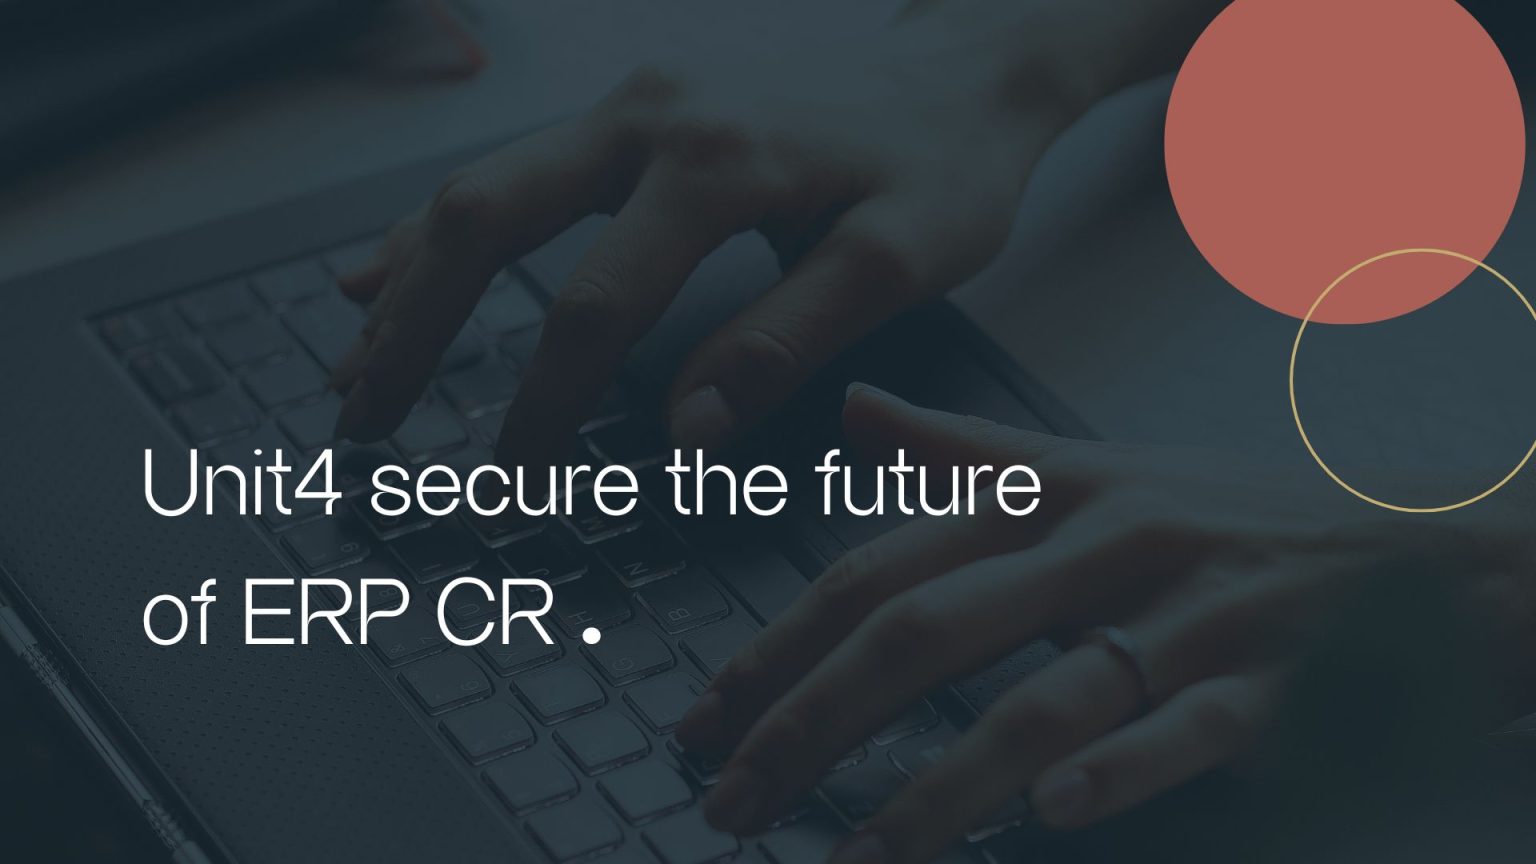 Unit4 secure the future of ERP CR